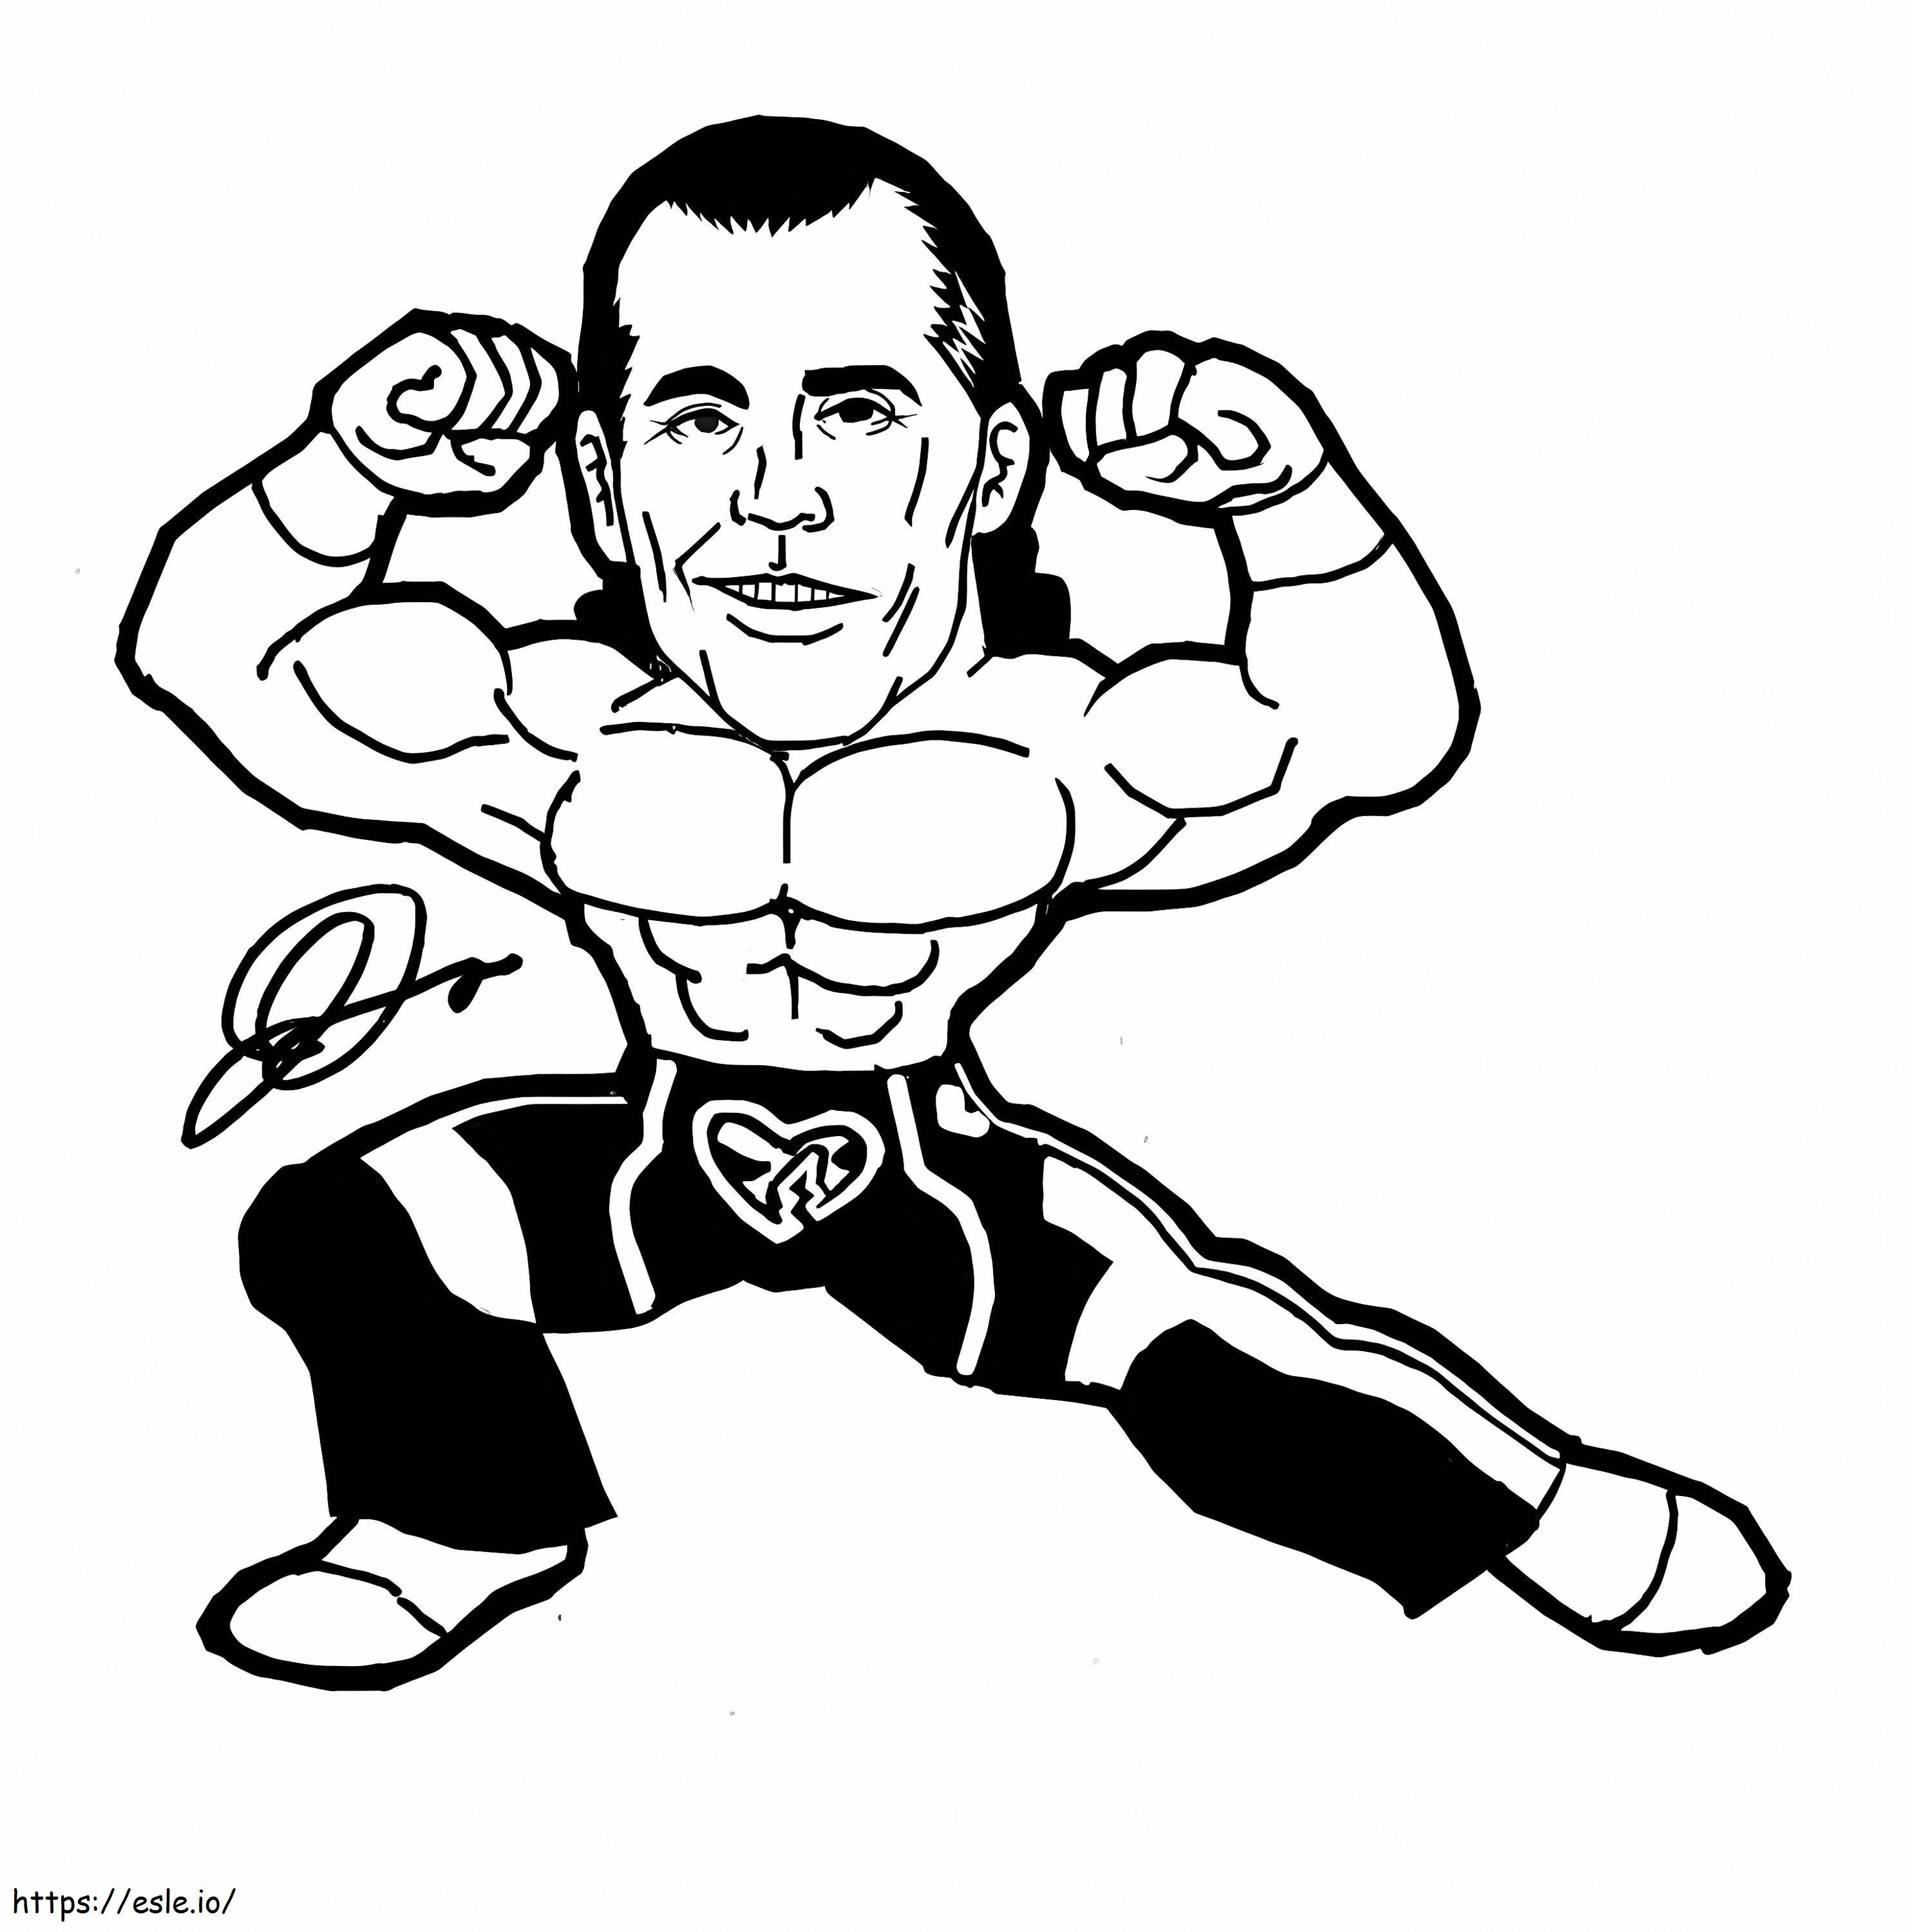 Funny Shawn Michaels coloring page